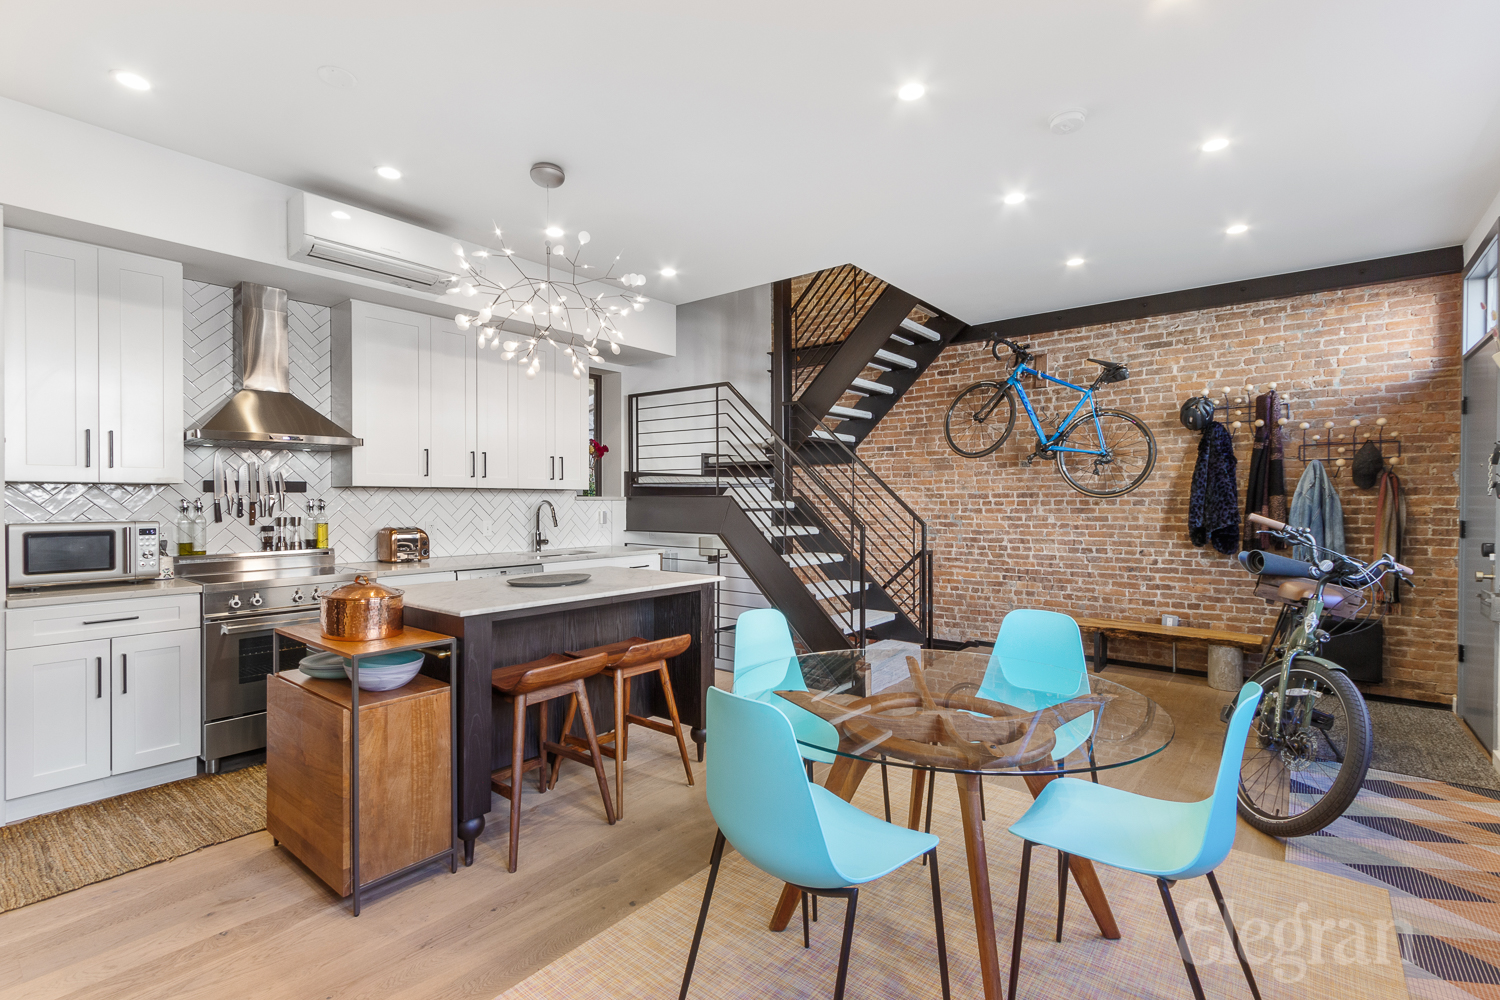 a dining and kitchen area with stairs and a brick wall with a bike hanging on it.